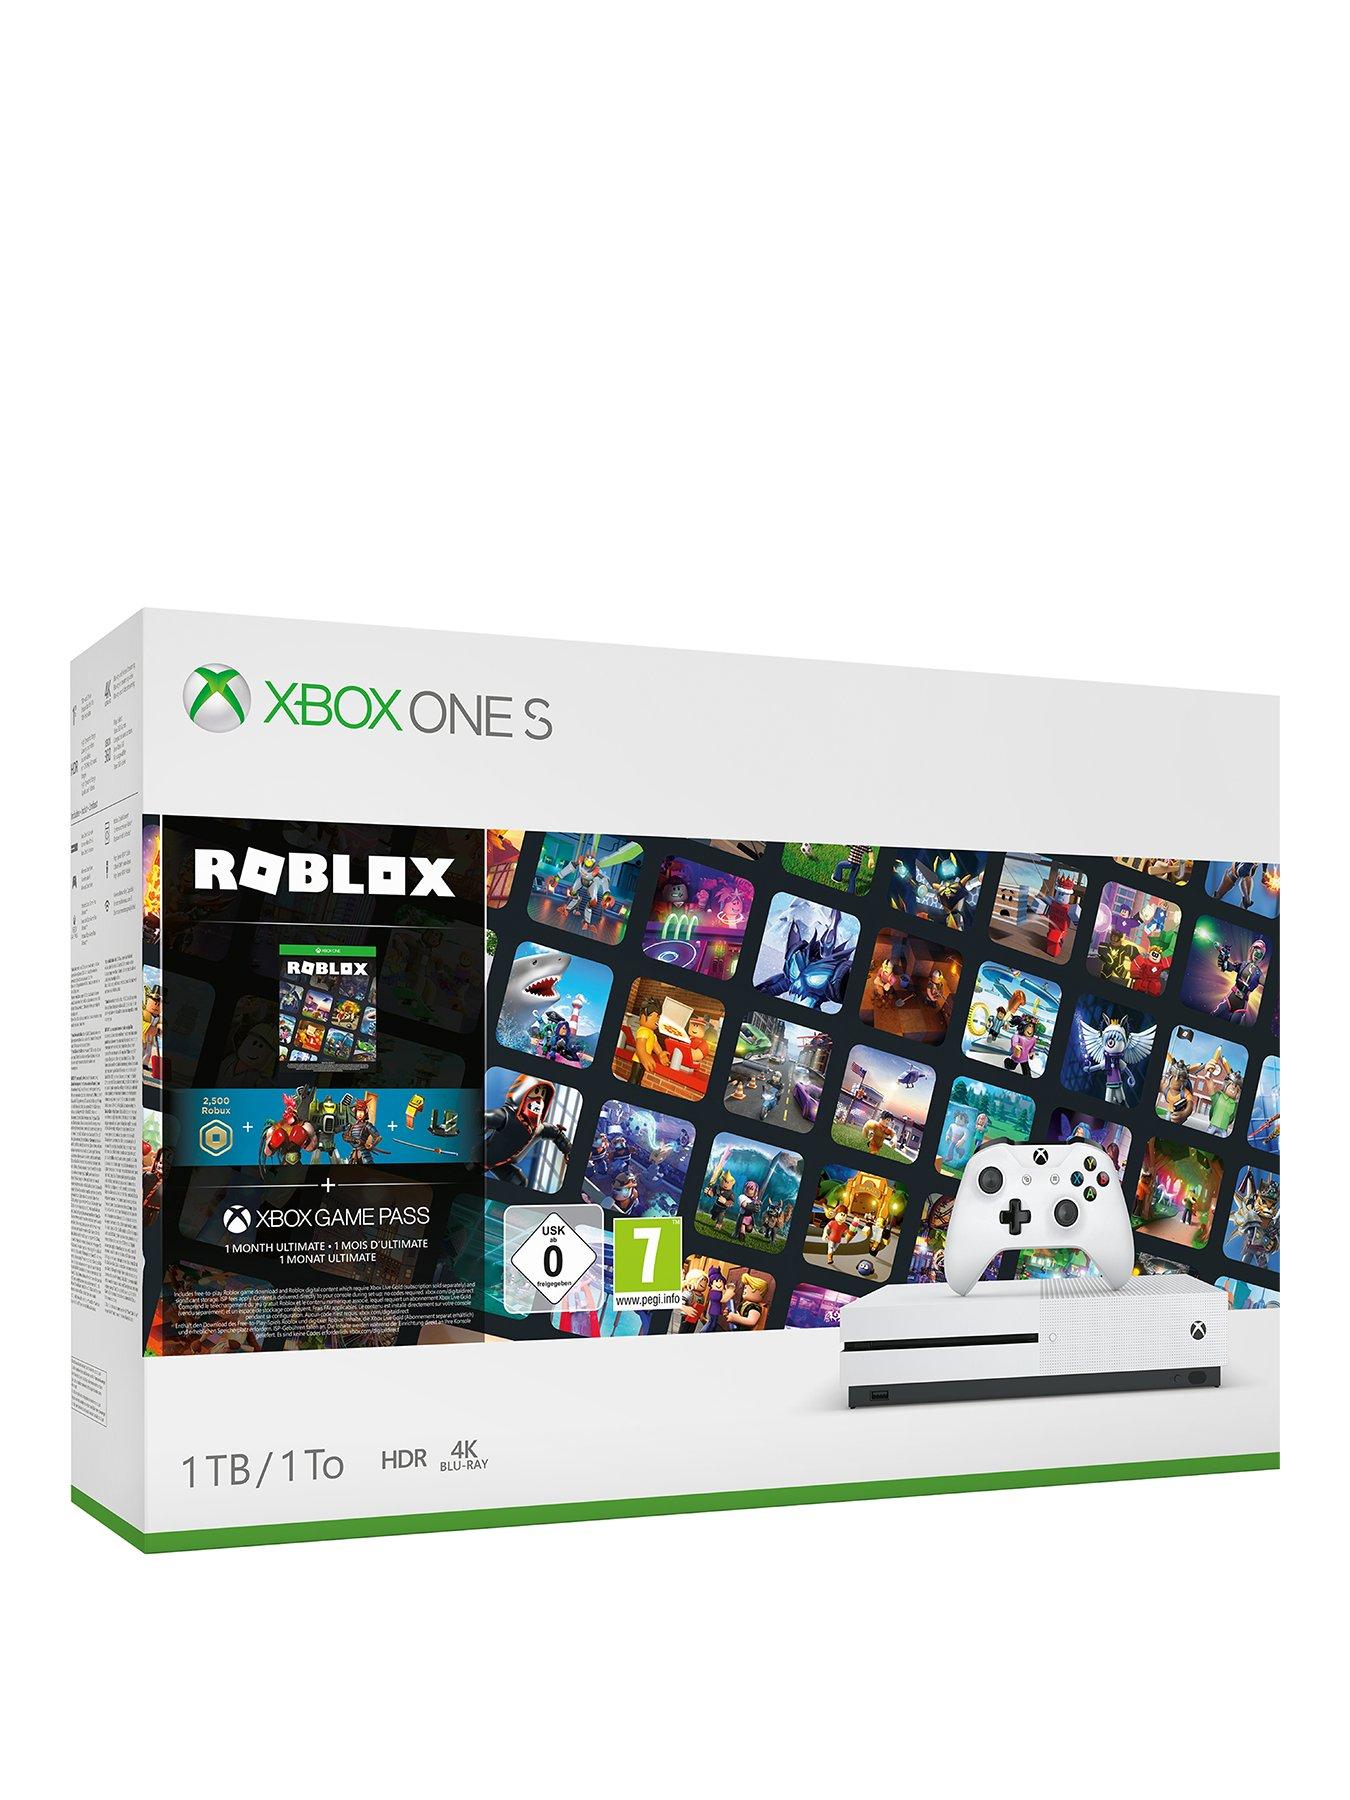 how to play roblox on xbox one s without xbox live gold